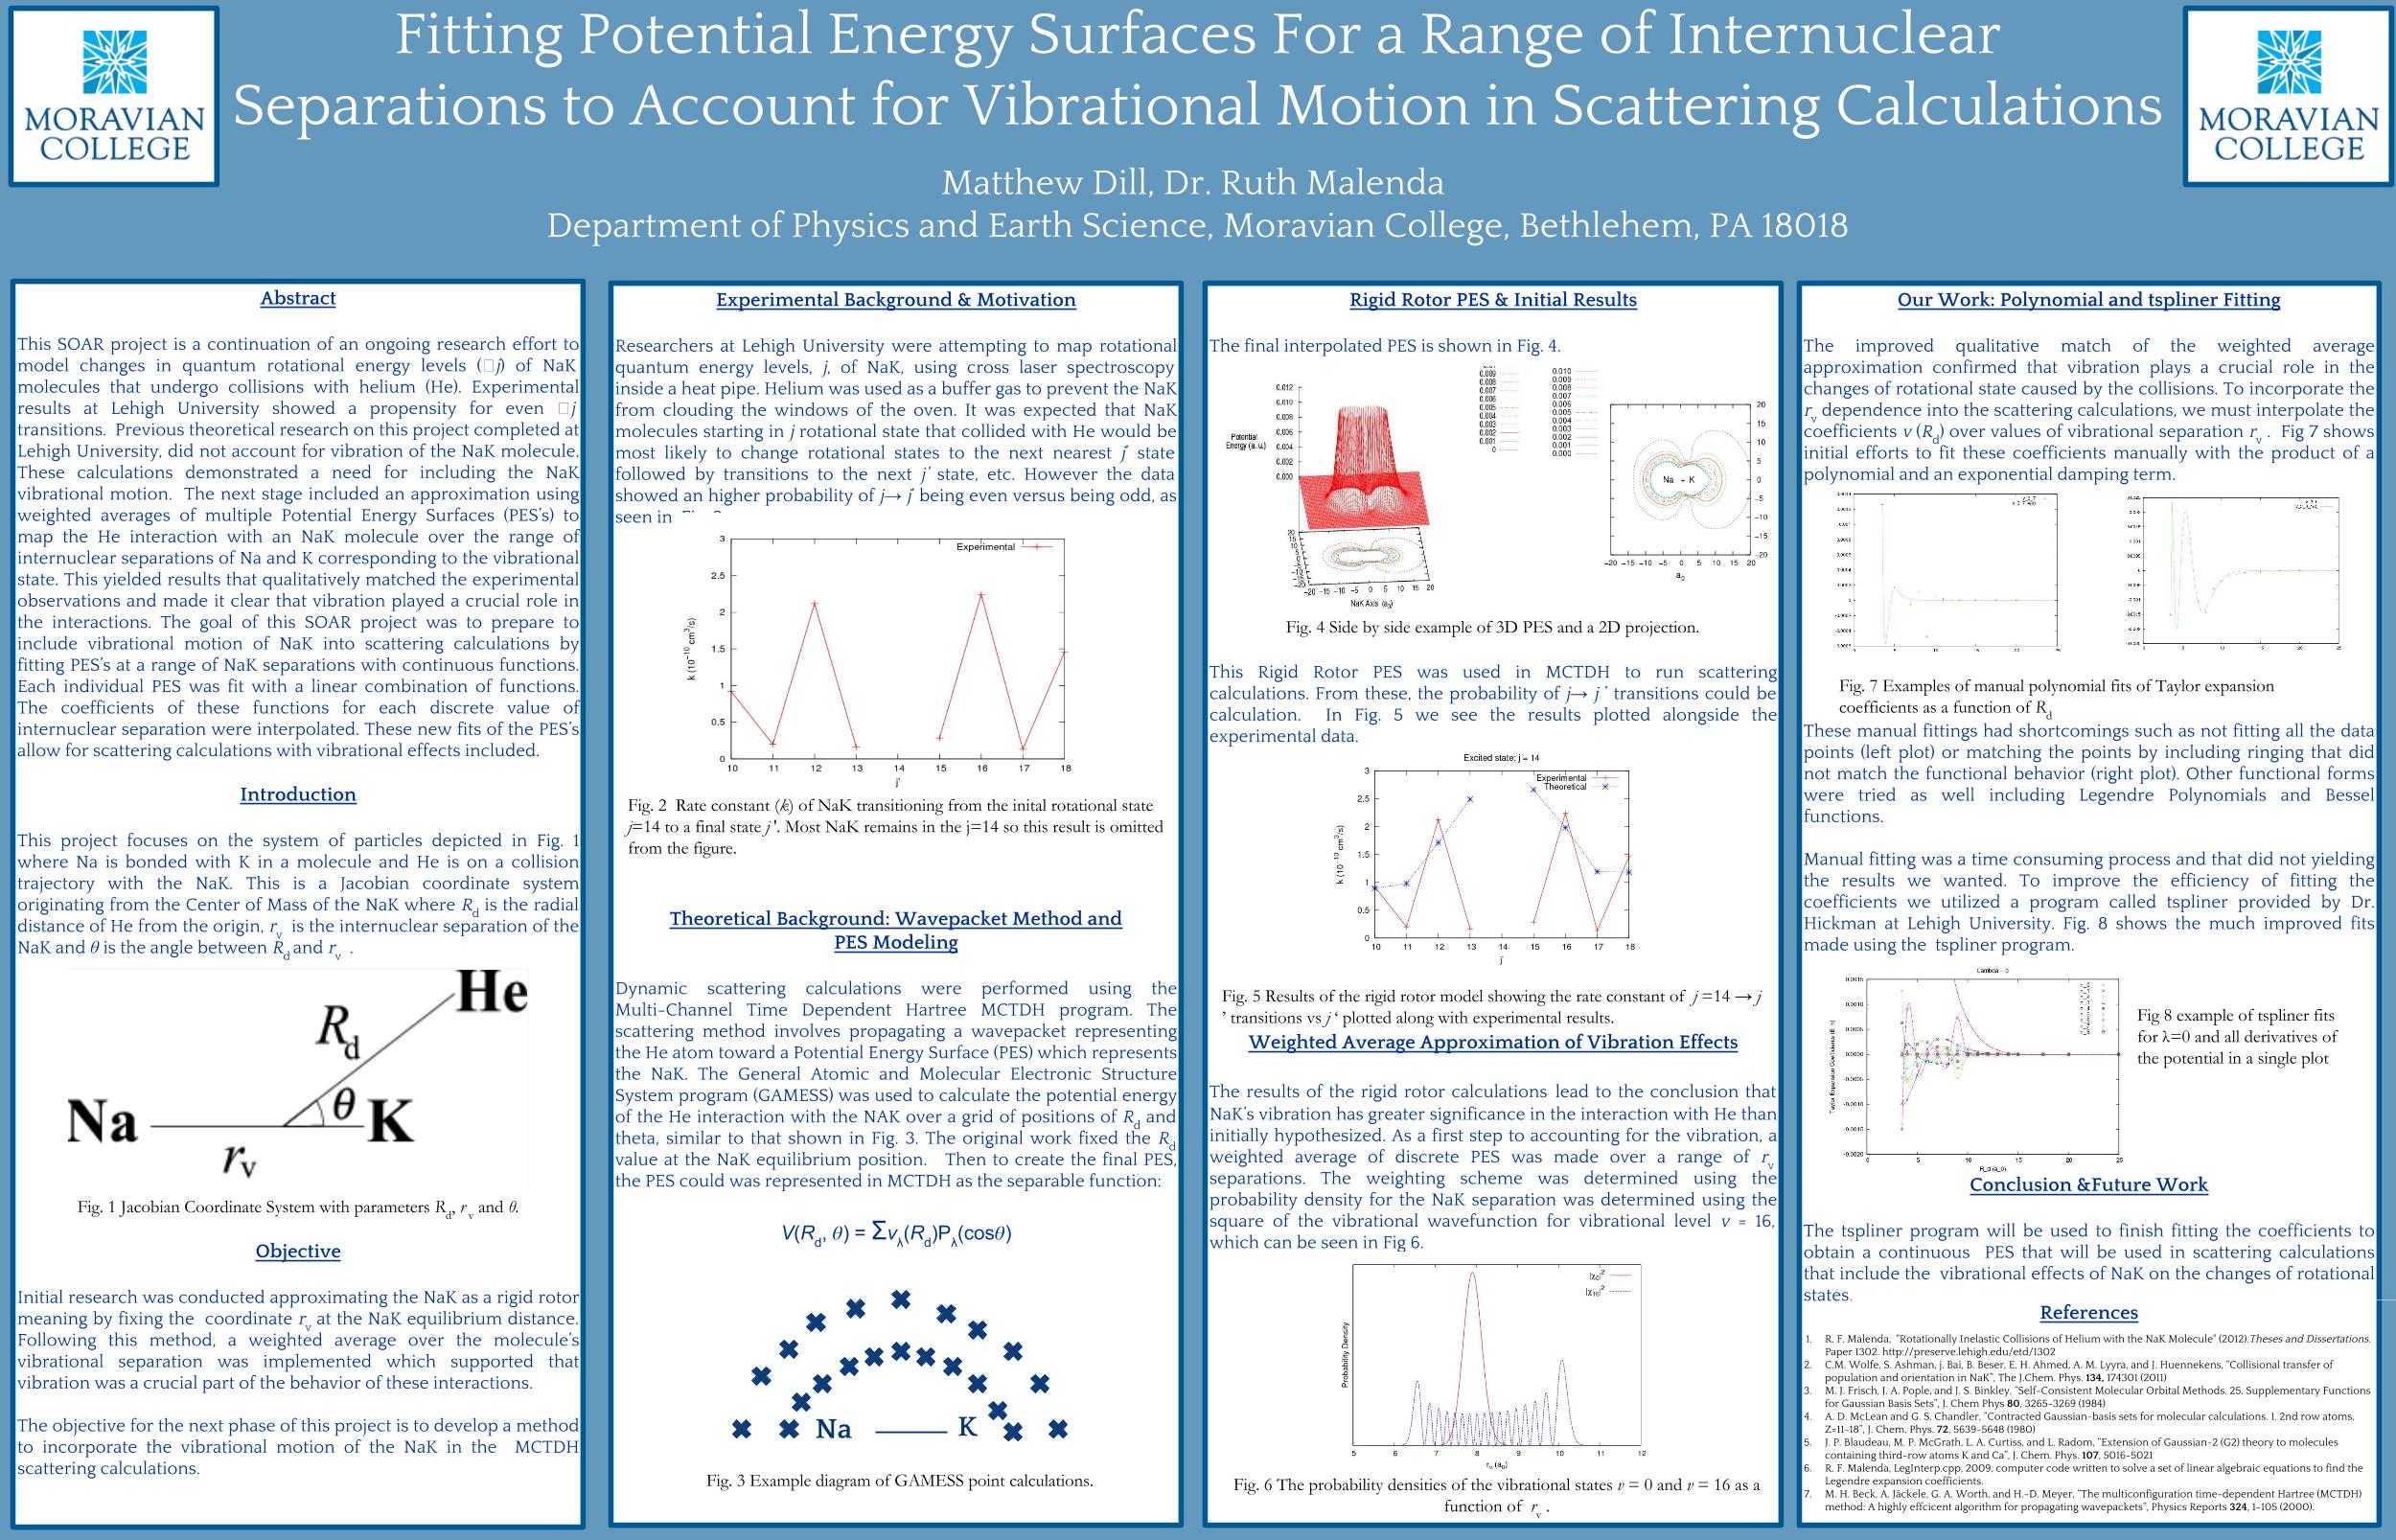 Poster_Fitting Potential Energy Surfaces For a Range of Internuclear  Separations to Account for Vibrational Motion in Scattering Calculations.jpg